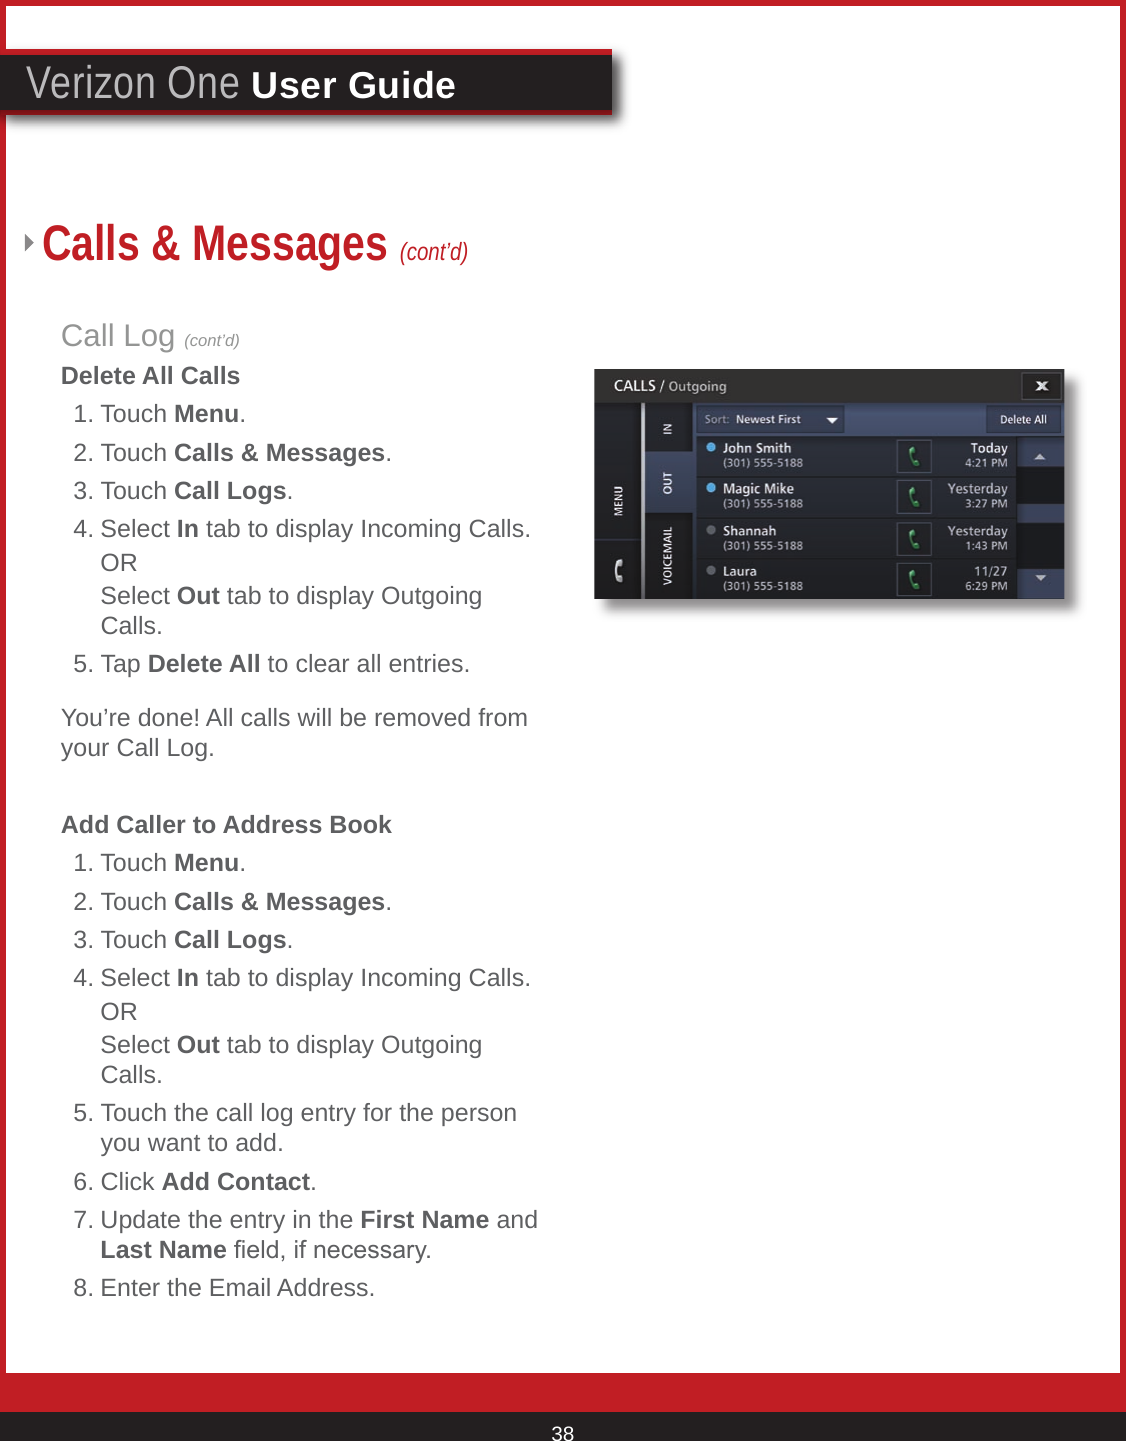 © 2007 Verizon. All Rights Reserved. 38Verizon One User GuideCall Log (cont’d)Delete All Calls  1. Touch Menu.  2. Touch Calls &amp; Messages. 3. Touch Call Logs.  4. Select In tab to display Incoming Calls.    OR    Select Out tab to display Outgoing       Calls.  5. Tap Delete All to clear all entries.You’re done! All calls will be removed from your Call Log.Add Caller to Address Book  1. Touch Menu.  2. Touch Calls &amp; Messages. 3. Touch Call Logs.  4. Select In tab to display Incoming Calls.    OR    Select Out tab to display Outgoing       Calls.  5. Touch the call log entry for the person      you want to add.  6. Click Add Contact.  7. Update the entry in the First Name and      Last Name eld, if necessary.  8. Enter the Email Address.Calls &amp; Messages (cont’d)